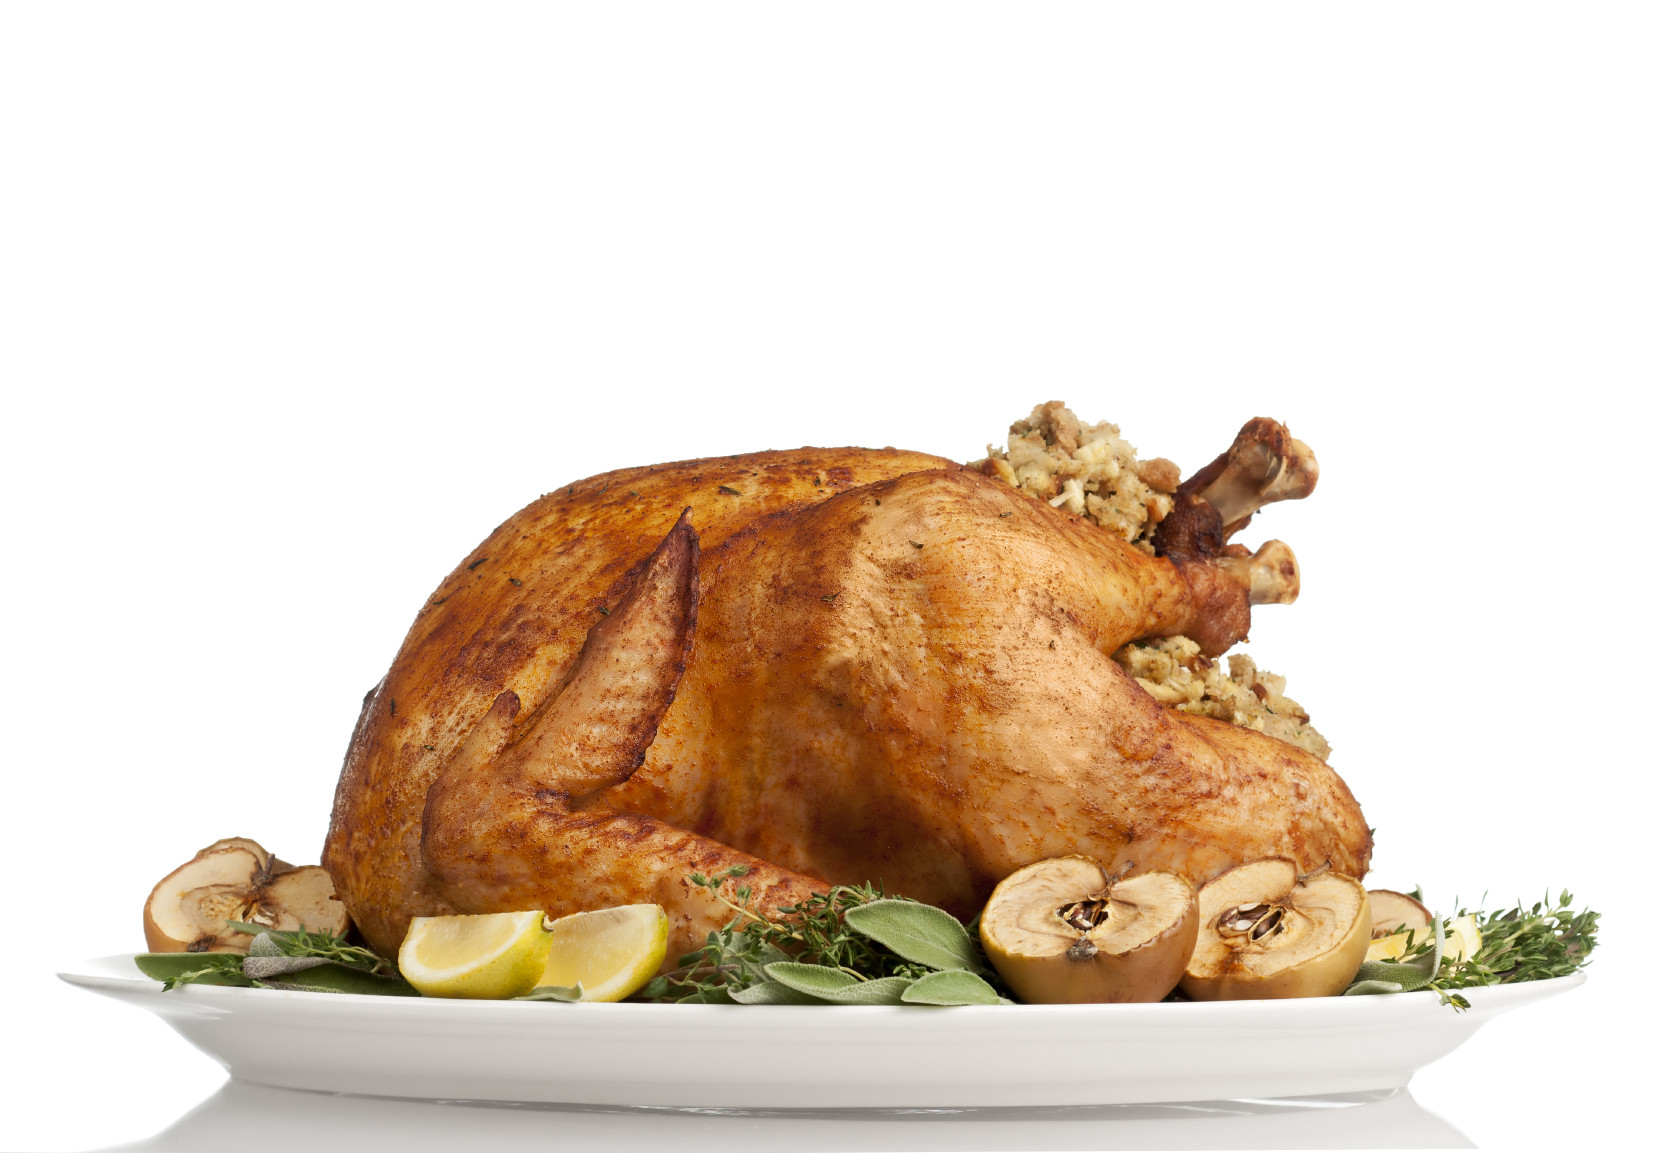 Fresh Turkey For Thanksgiving
 How to Cook an Organic or Free Range Turkey